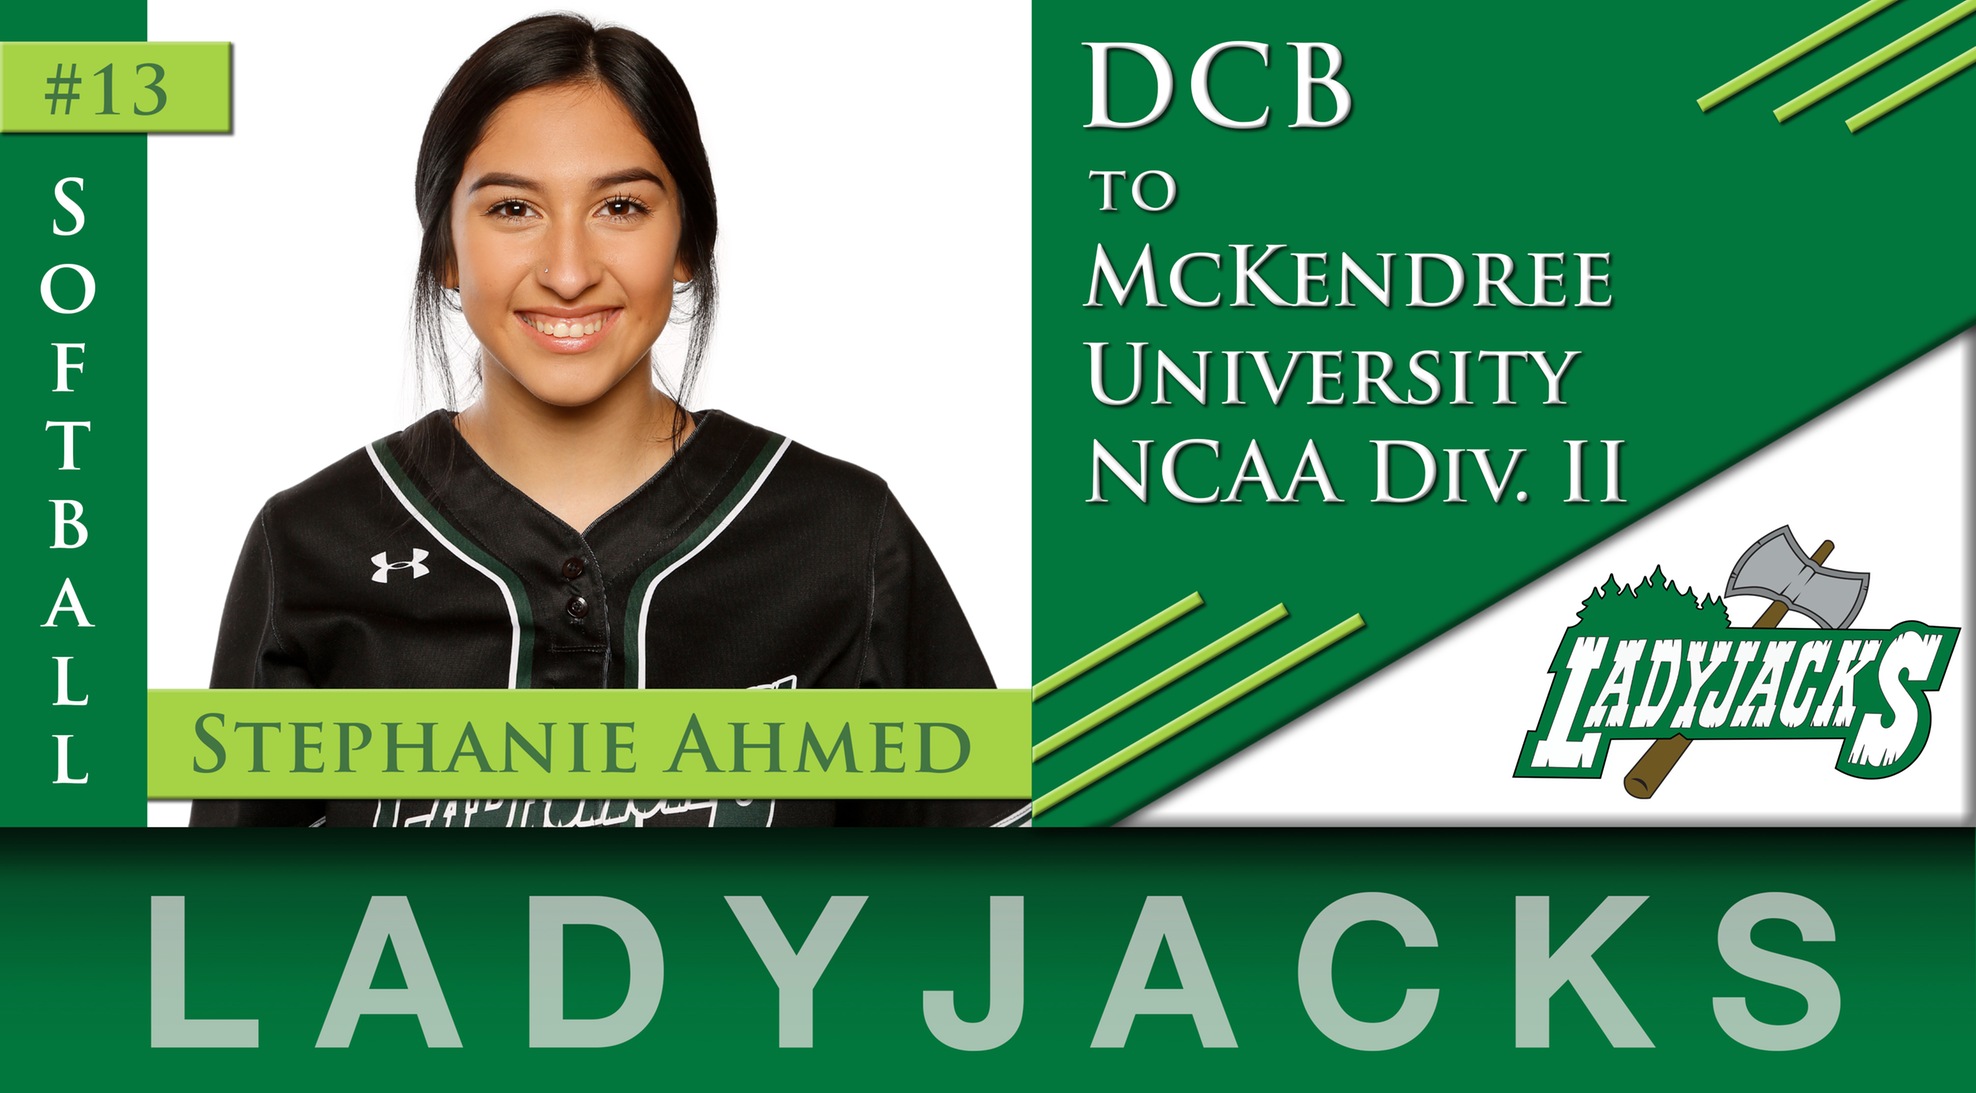 DCB's Ahmed Moving On To NCAA Div. II McKendree